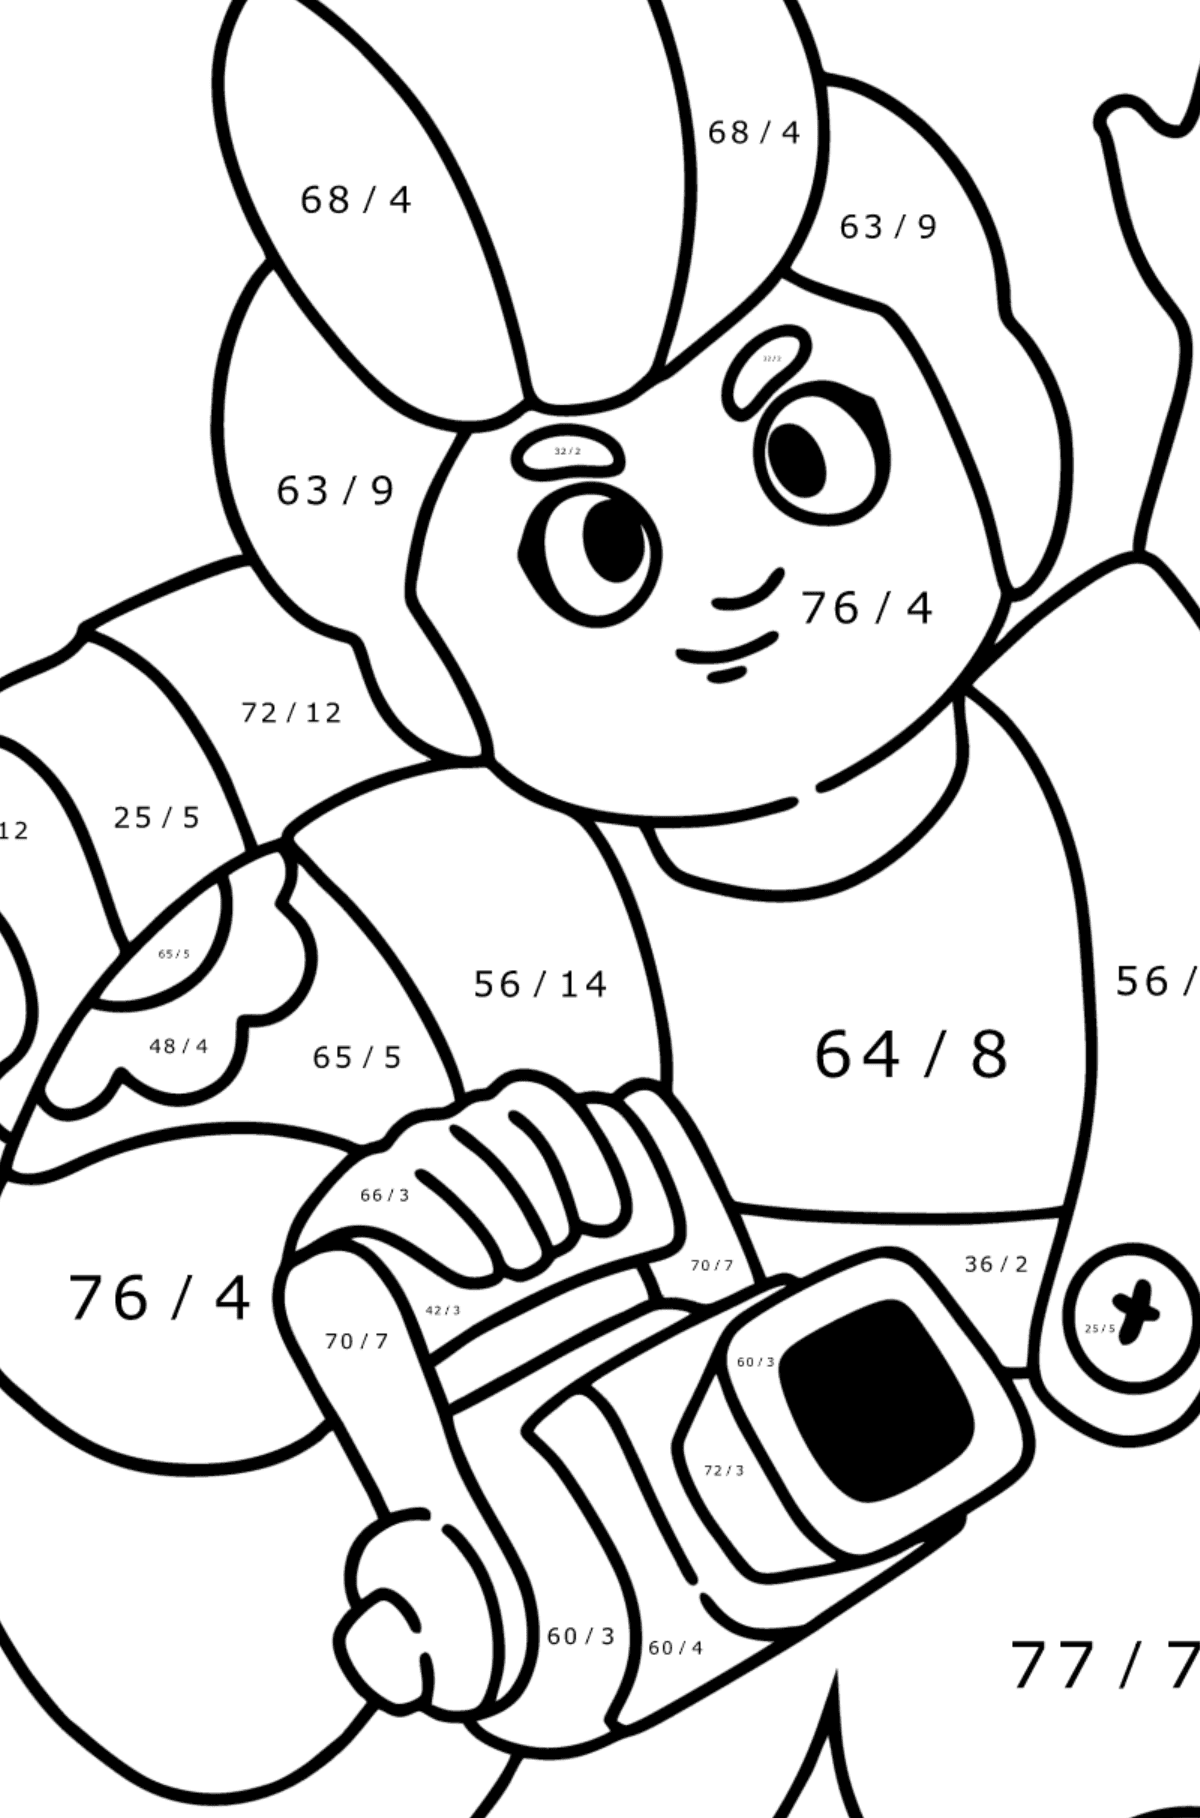 Brawl Stars Pam coloring page - Math Coloring - Division for Kids